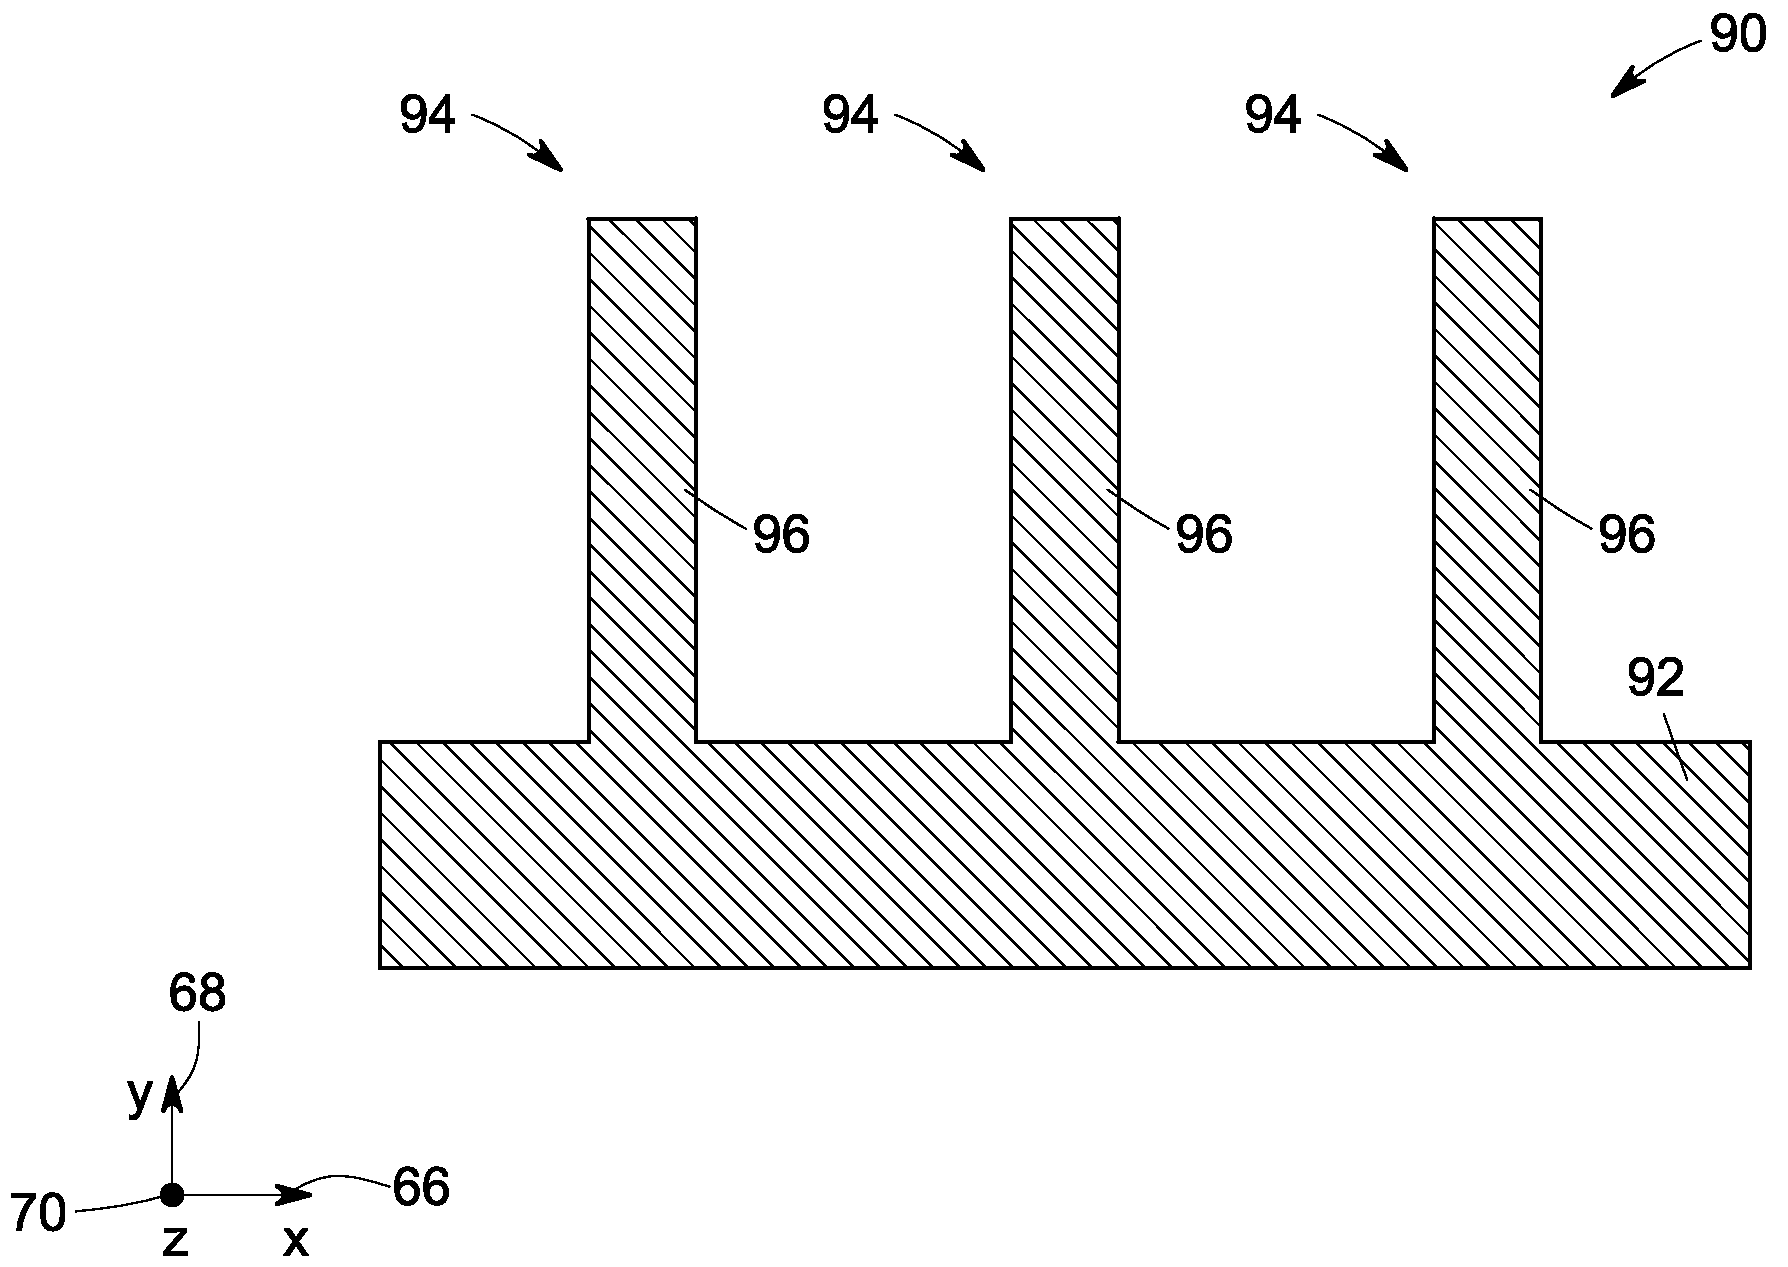 Combined acoustic absorber and heat exchanging outlet guide vanes